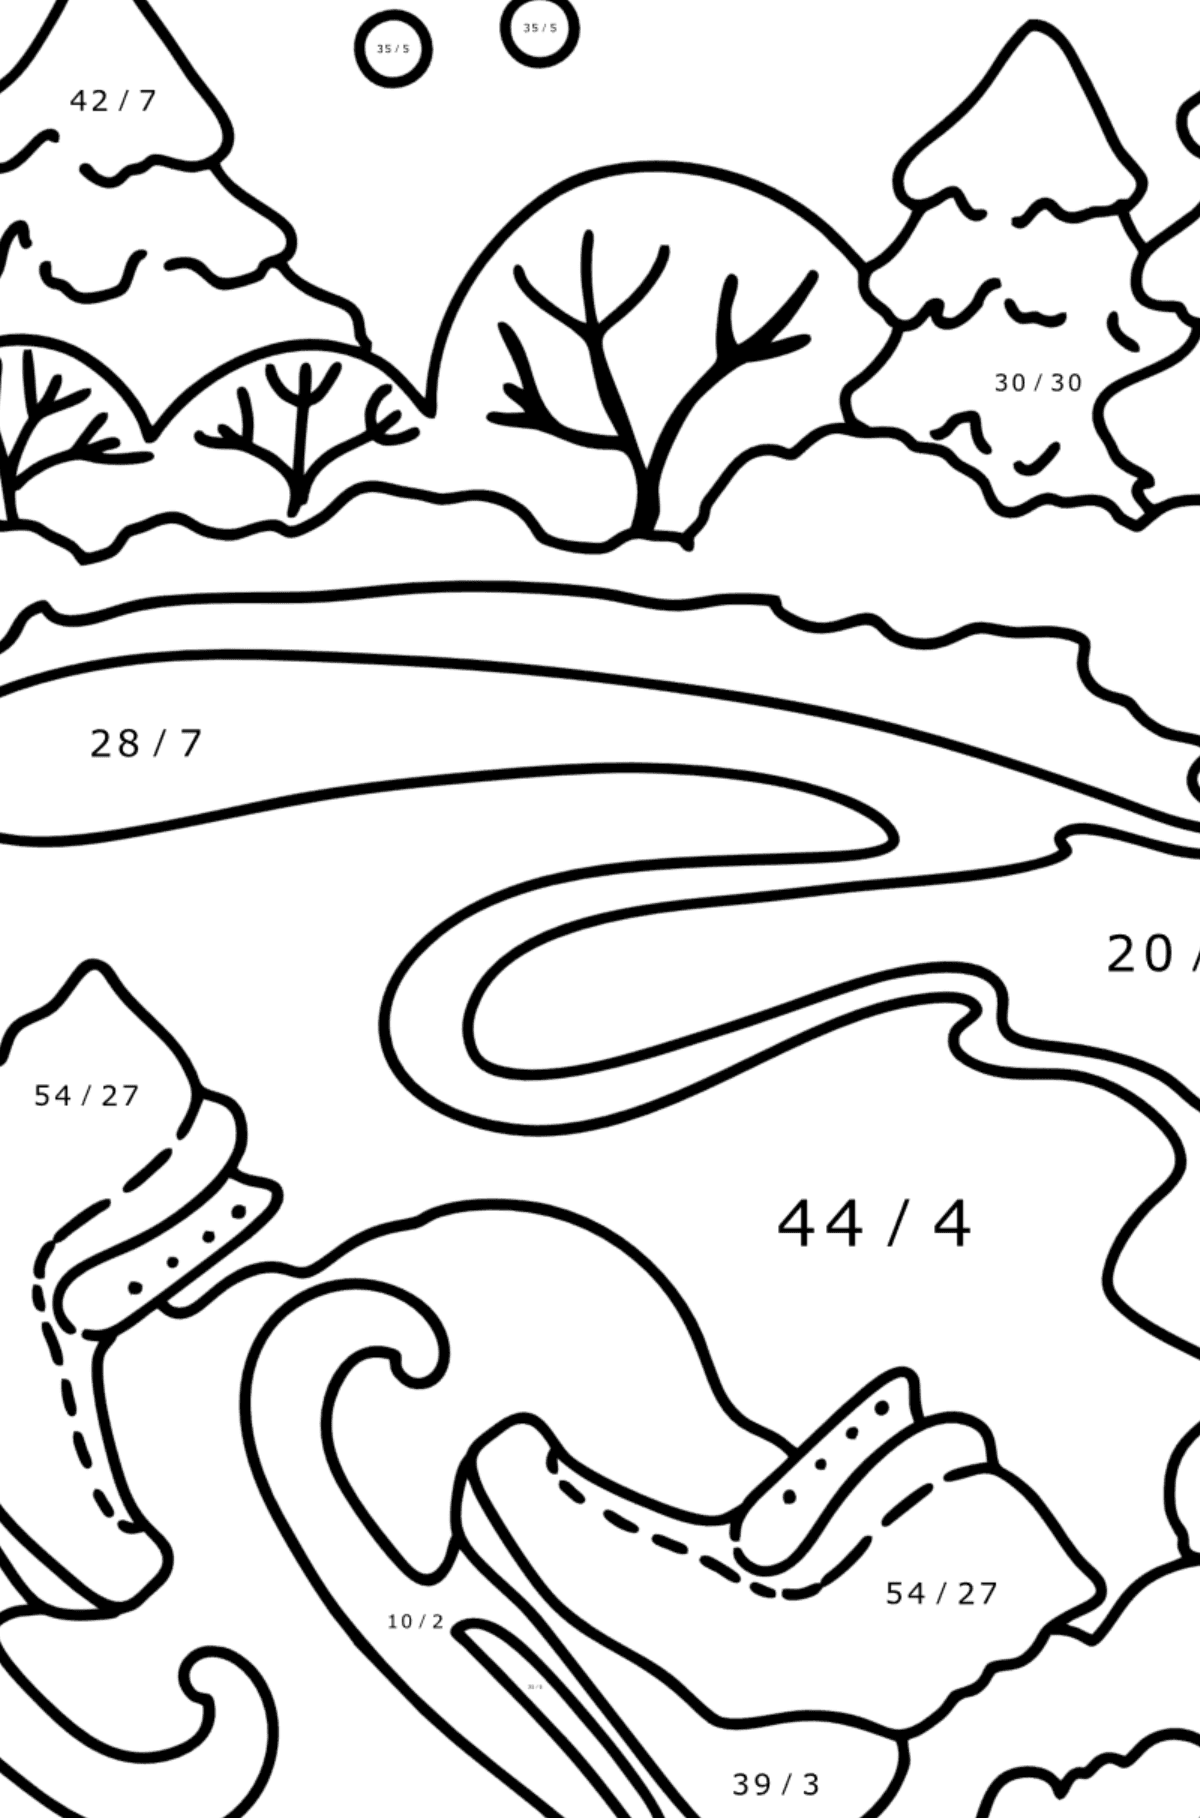 Coloring page - Winter and skates - Math Coloring - Division for Kids